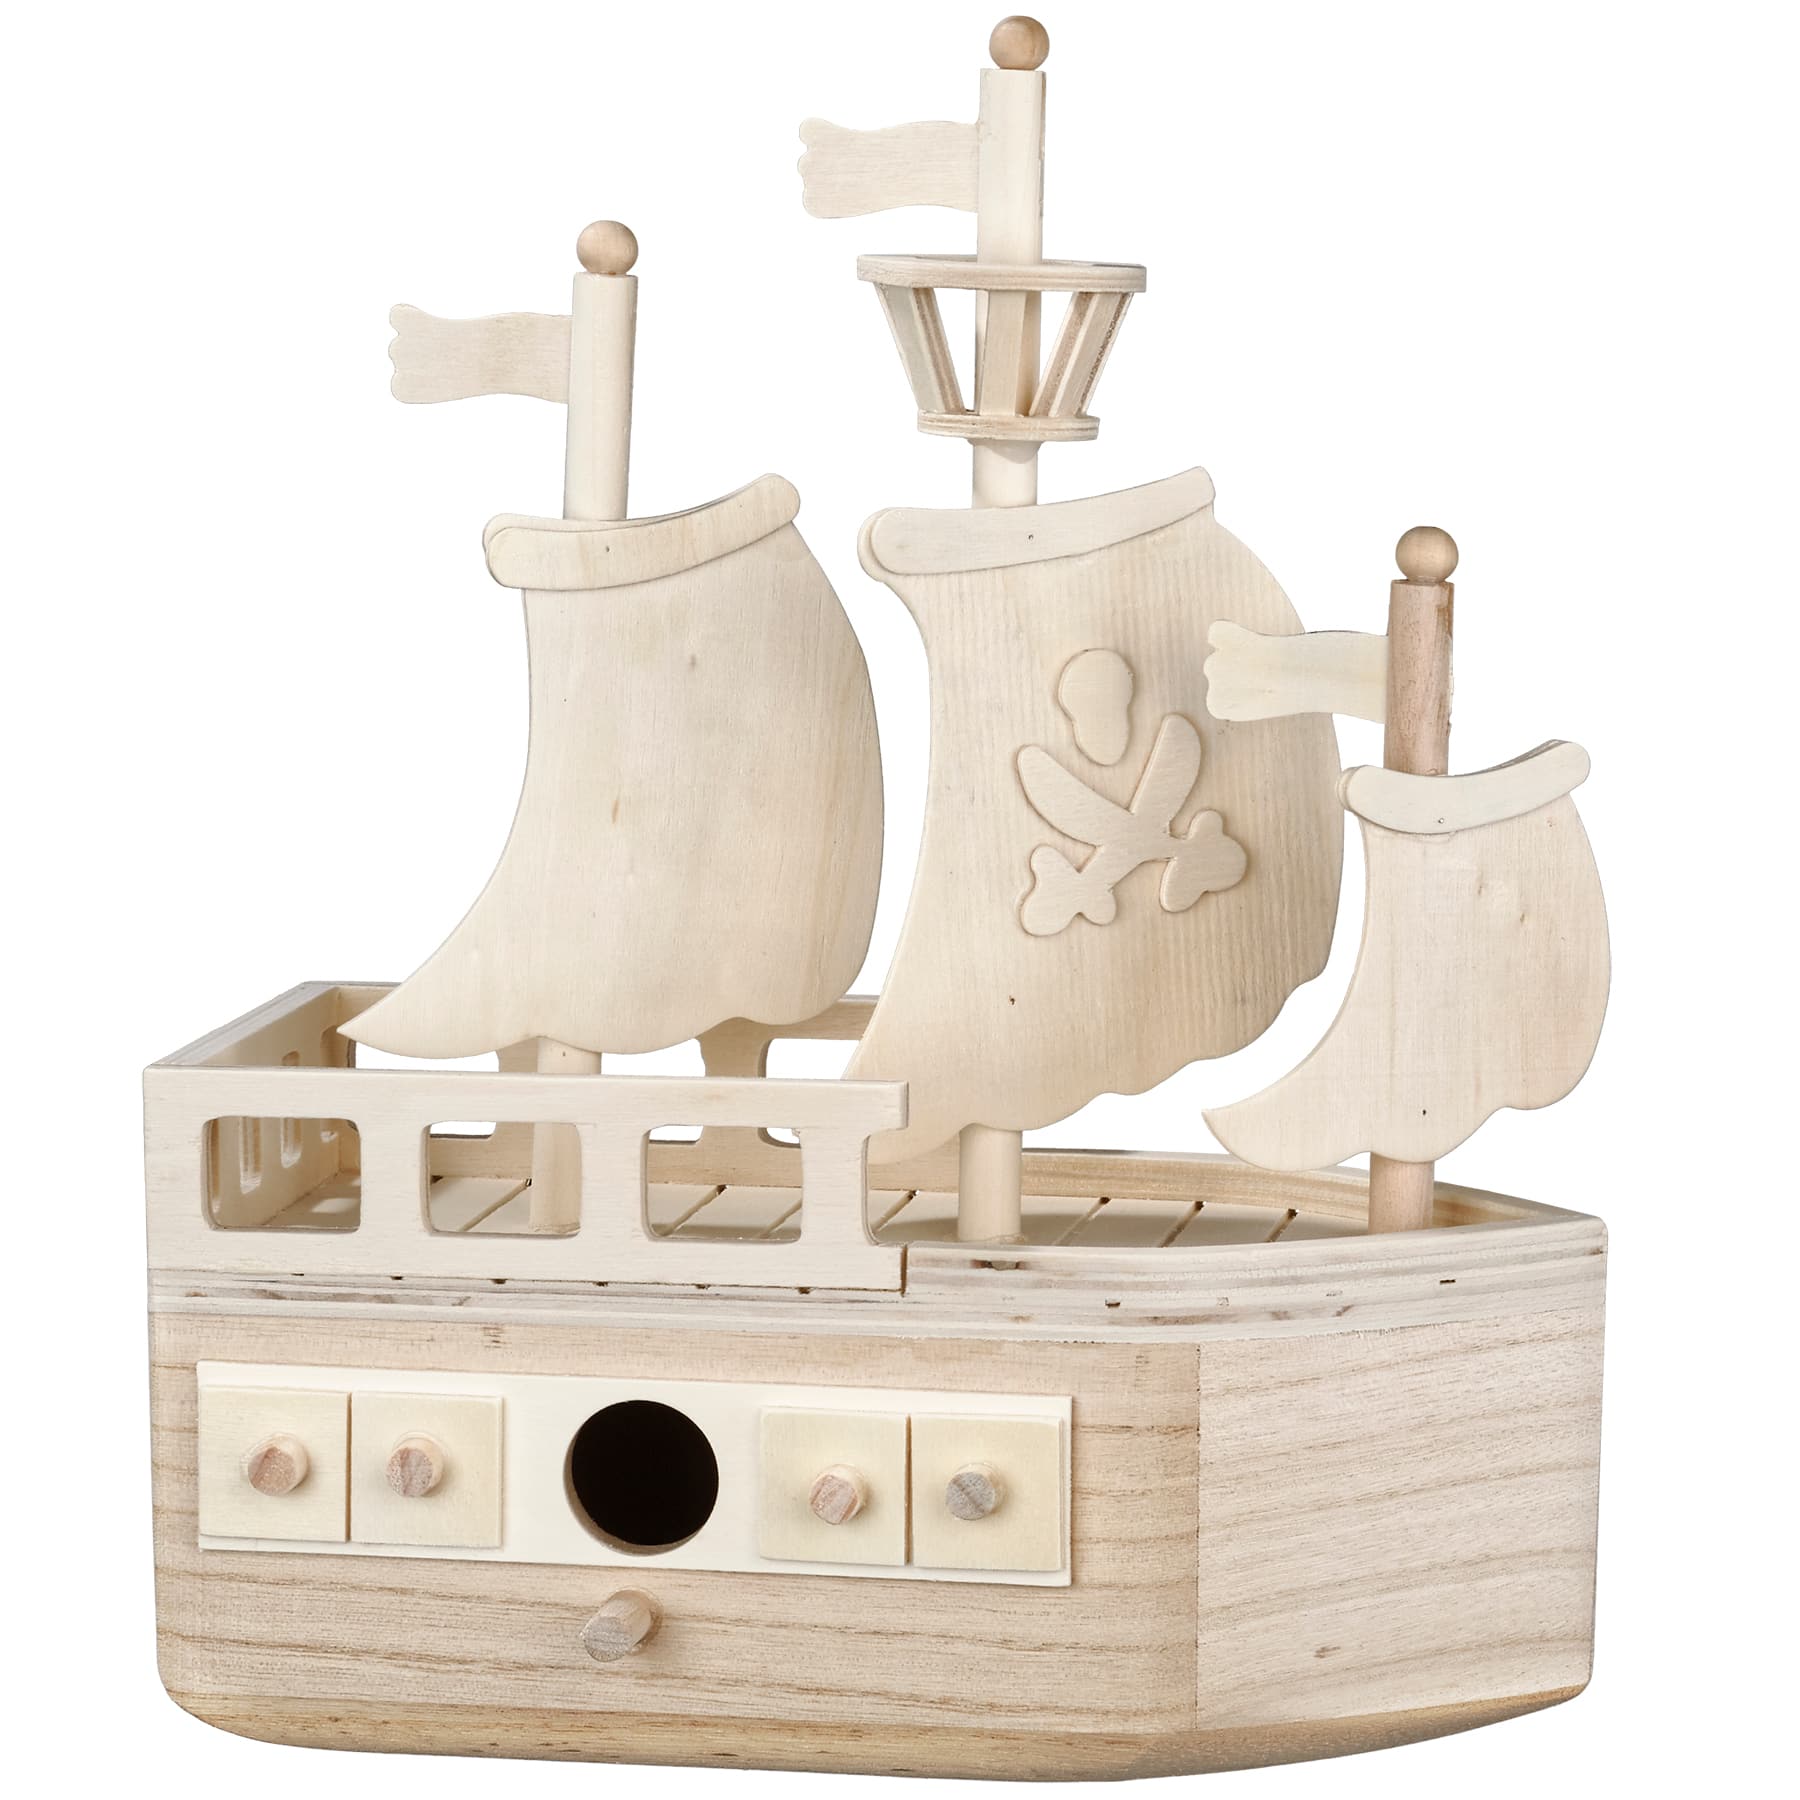 Vintiquewise 12 in. x 6.8 in. x 6.8 in. Wooden Small Pirate Style